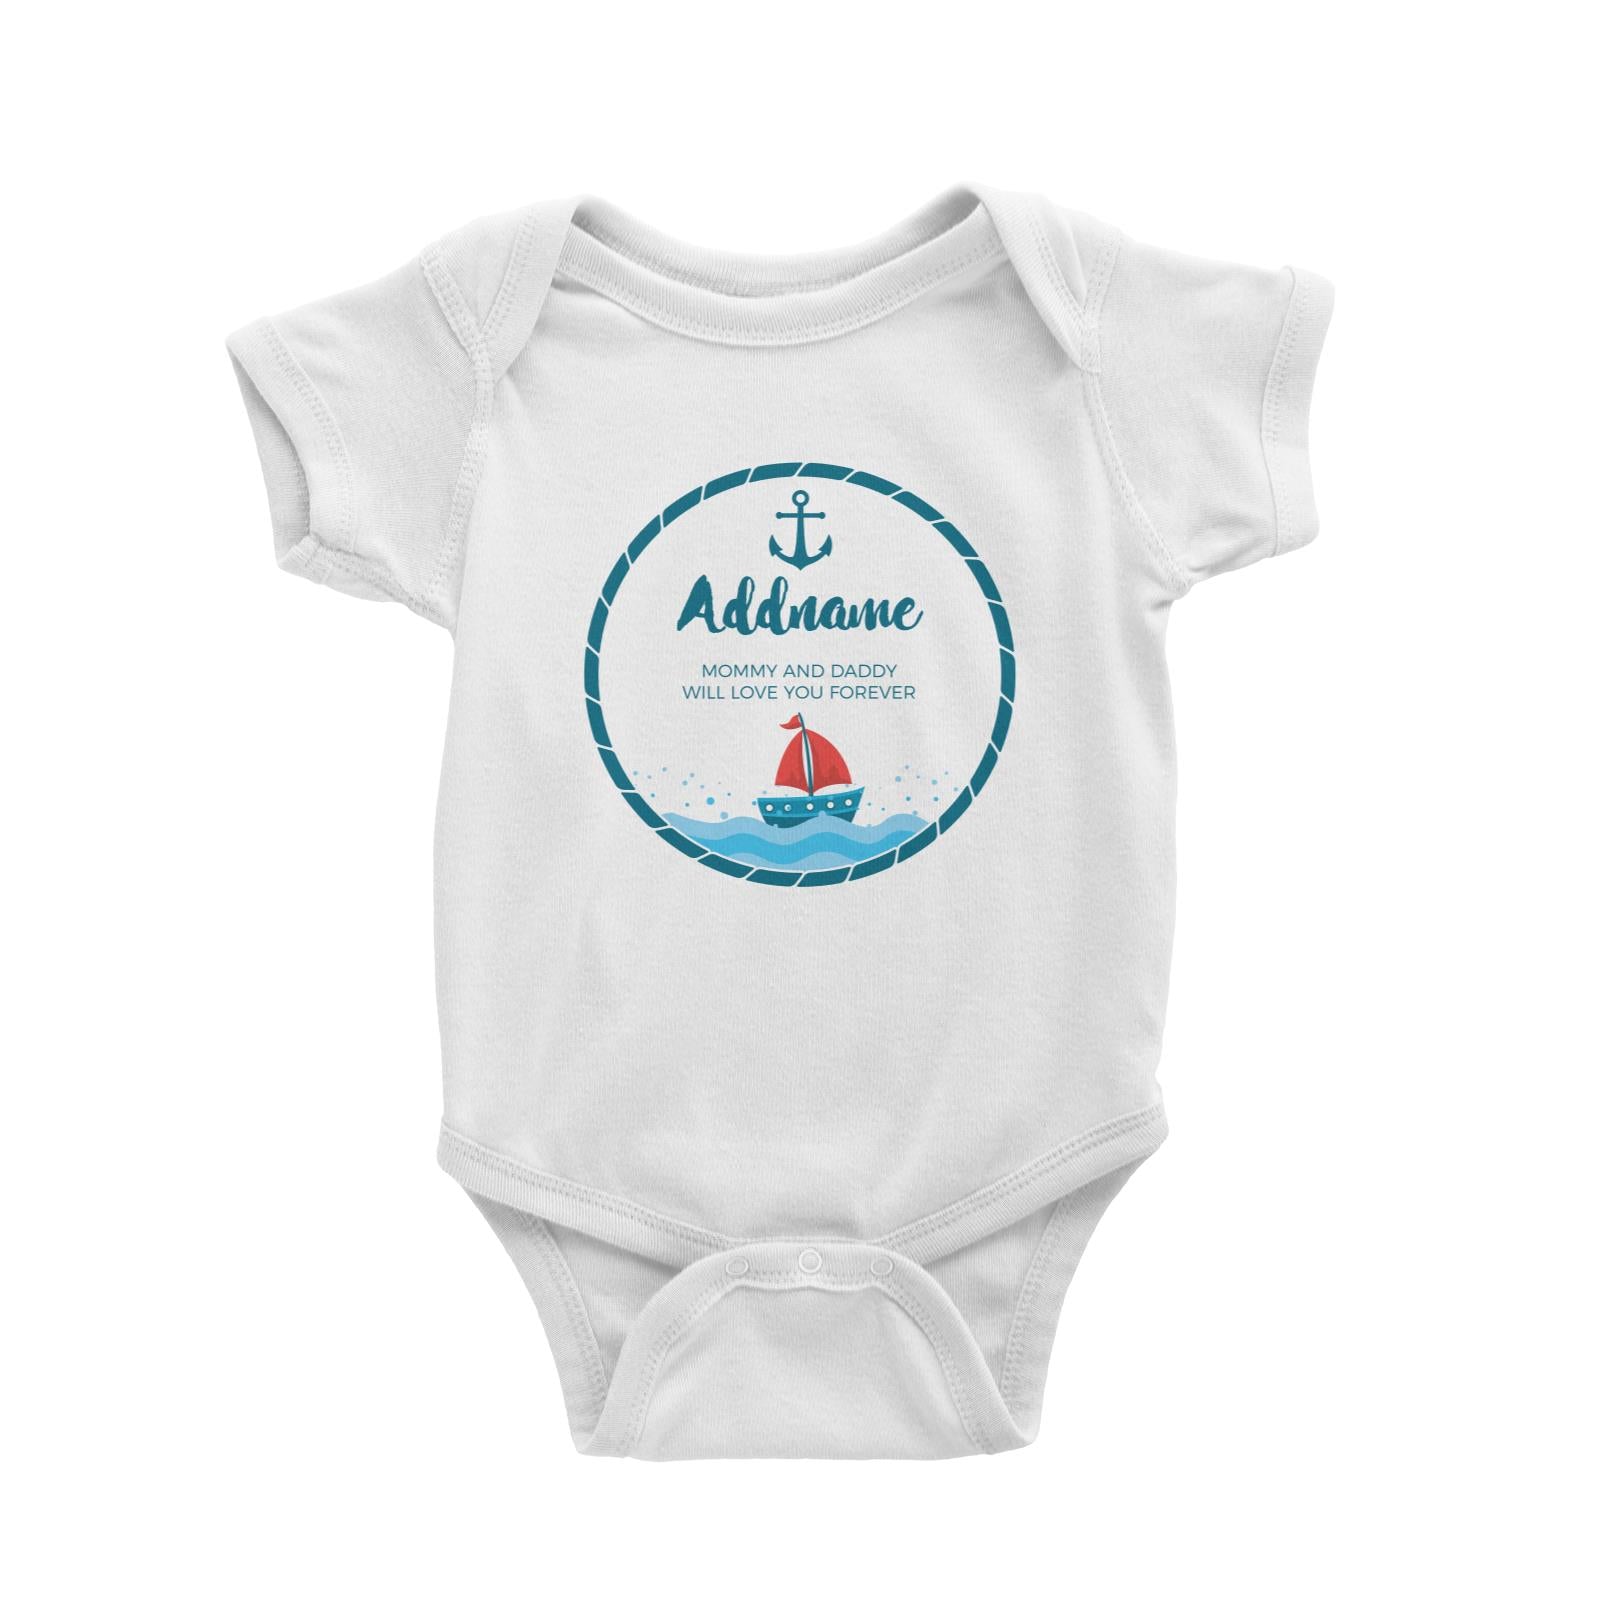 Sailor Emblem with Boat Personalizable with Name and Text Baby Romper